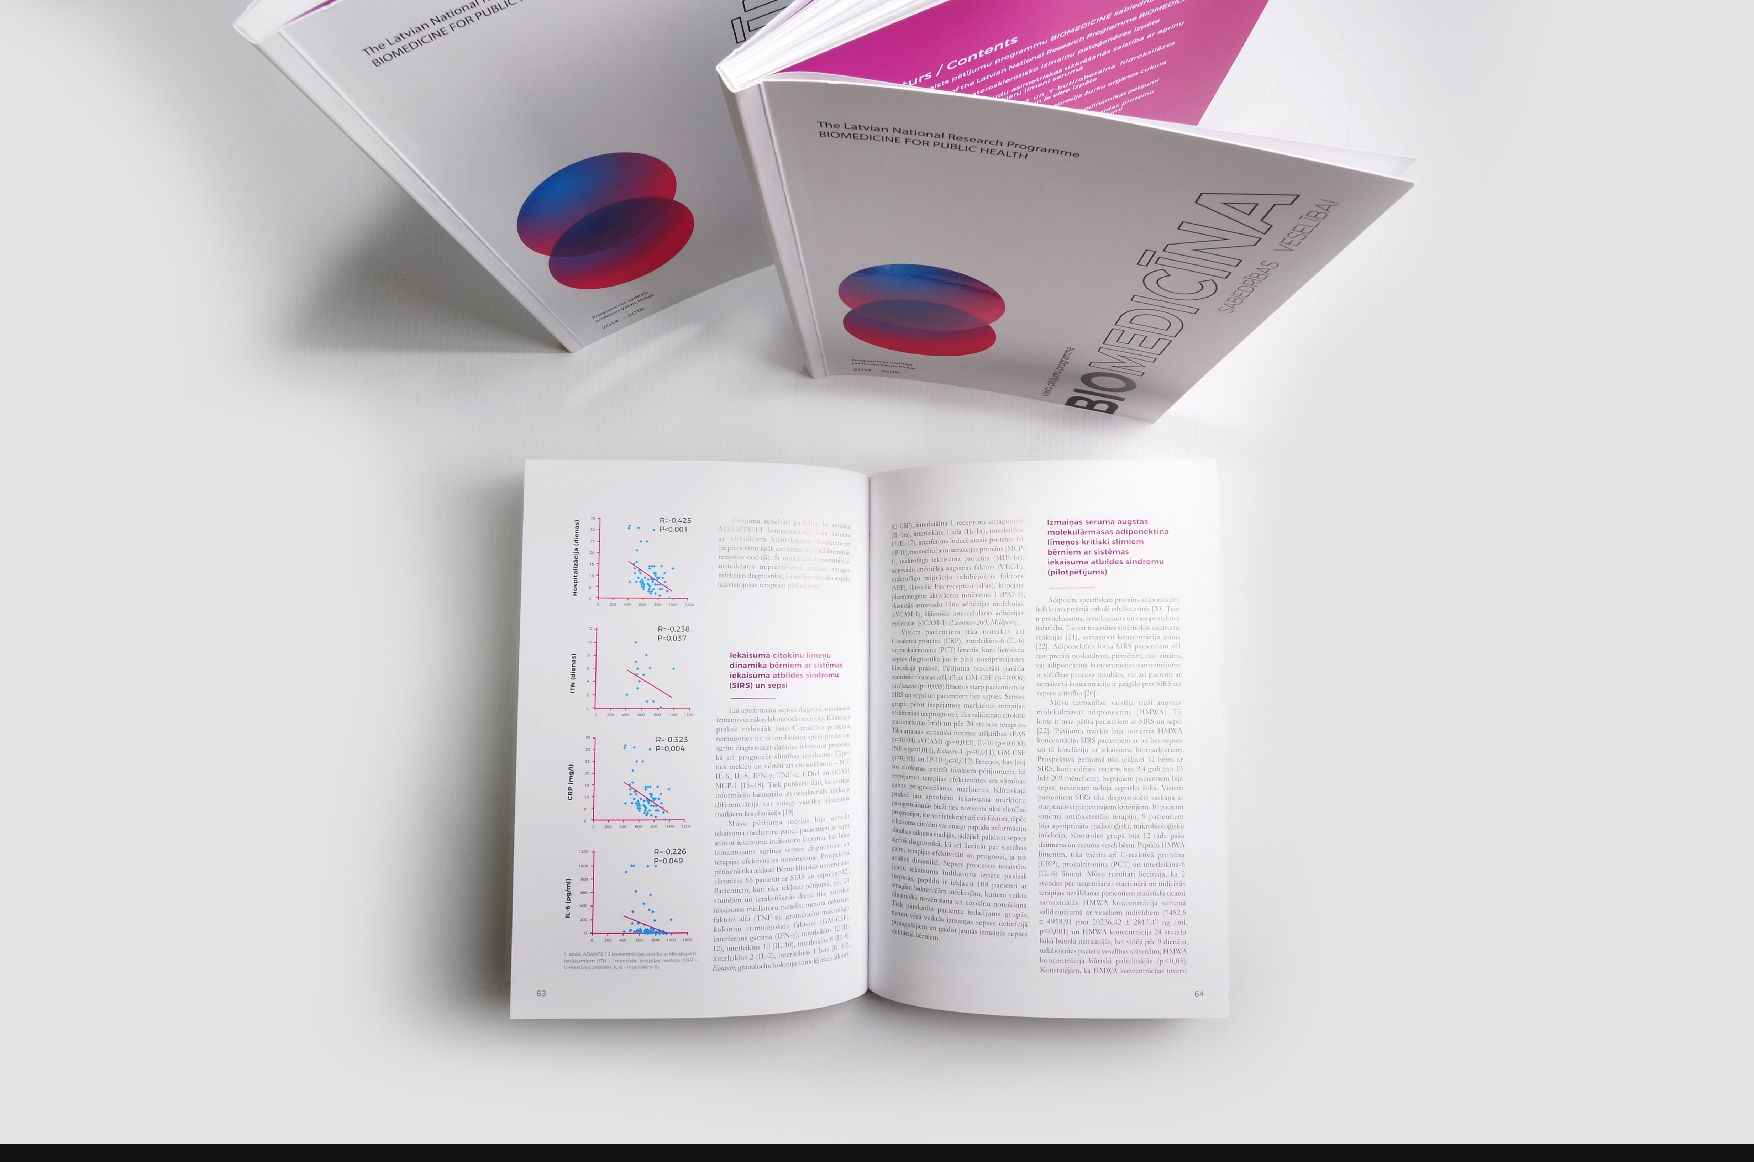 "BIOMEDICINE FOR PUBLIC HEALTH" book and layout design